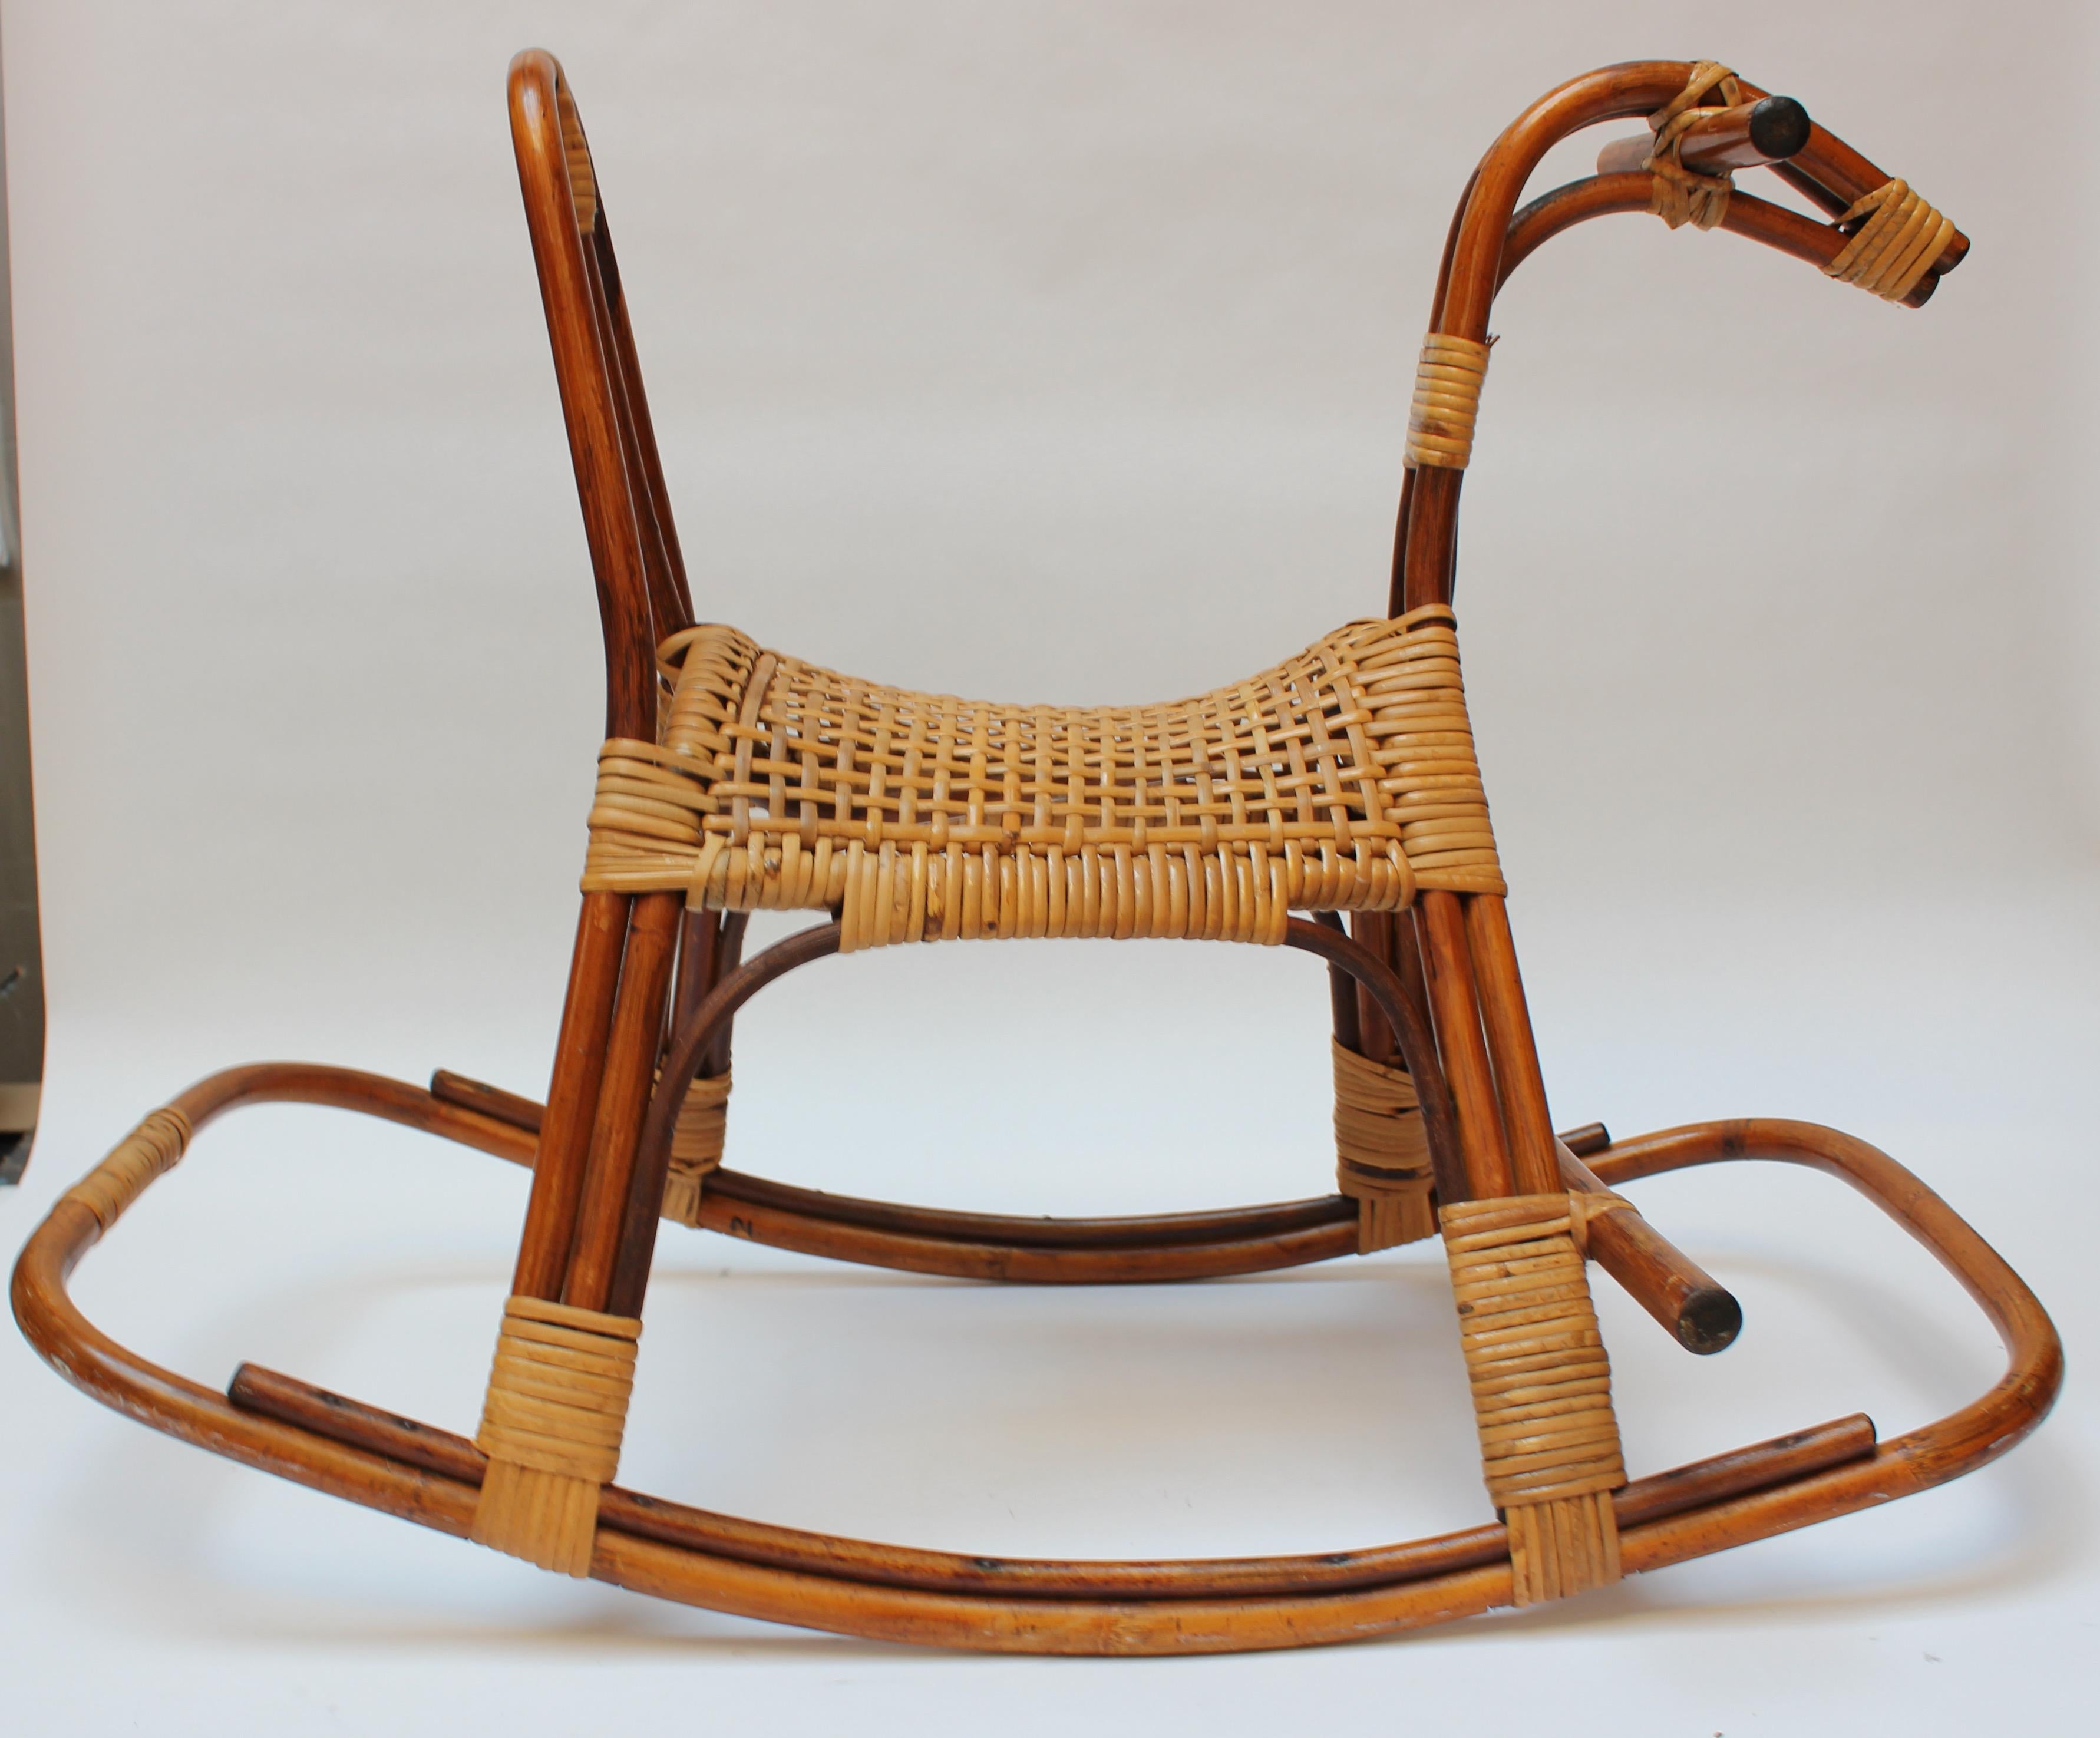 Mid-century rocking horse, often attributed to France Albini, composed of a bamboo frame with woven rattan seat and accents. 
Very good, vintage condition with natural patina and light wear (slight discoloration to bamboo and scuffs present, as